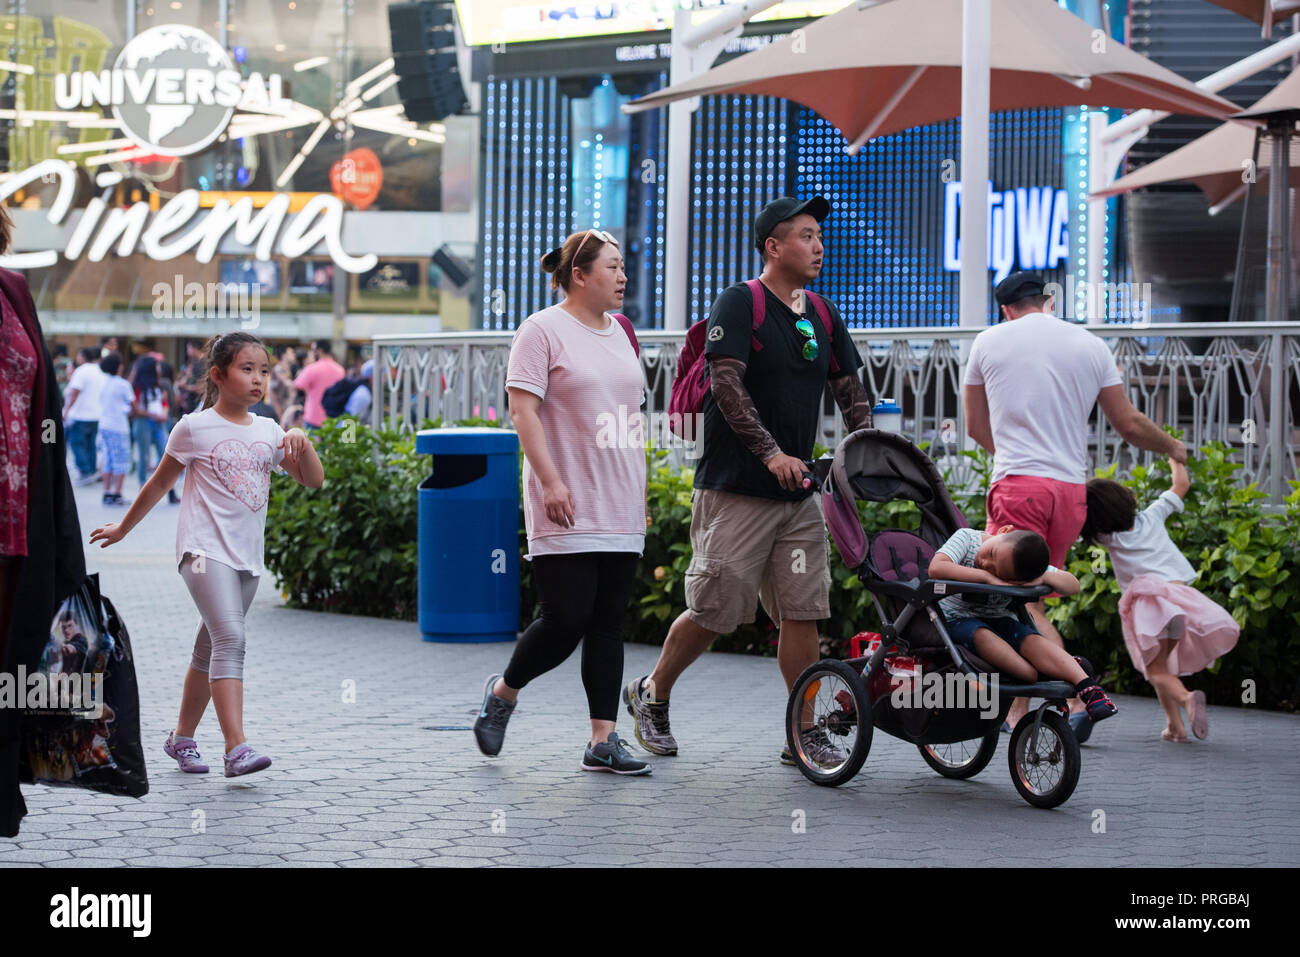 LOS ANGELES,CA - 9/9/2018: Universal city walk crowded with tourists and visitors . Stock Photo